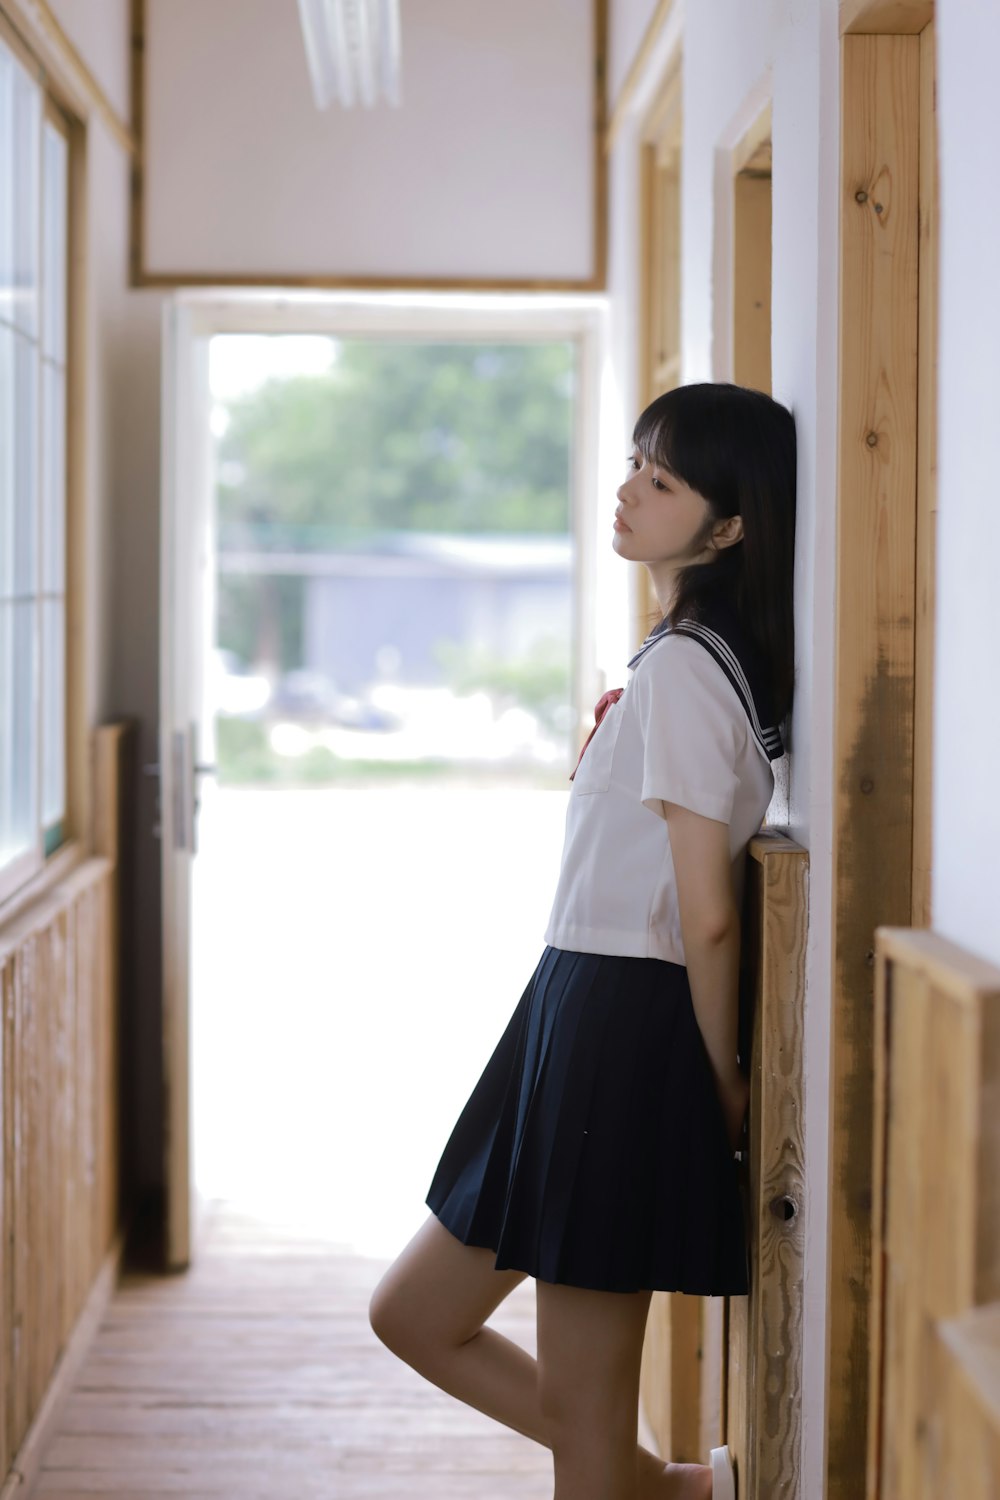 woman in white shirt and black skirt standing near window during daytime